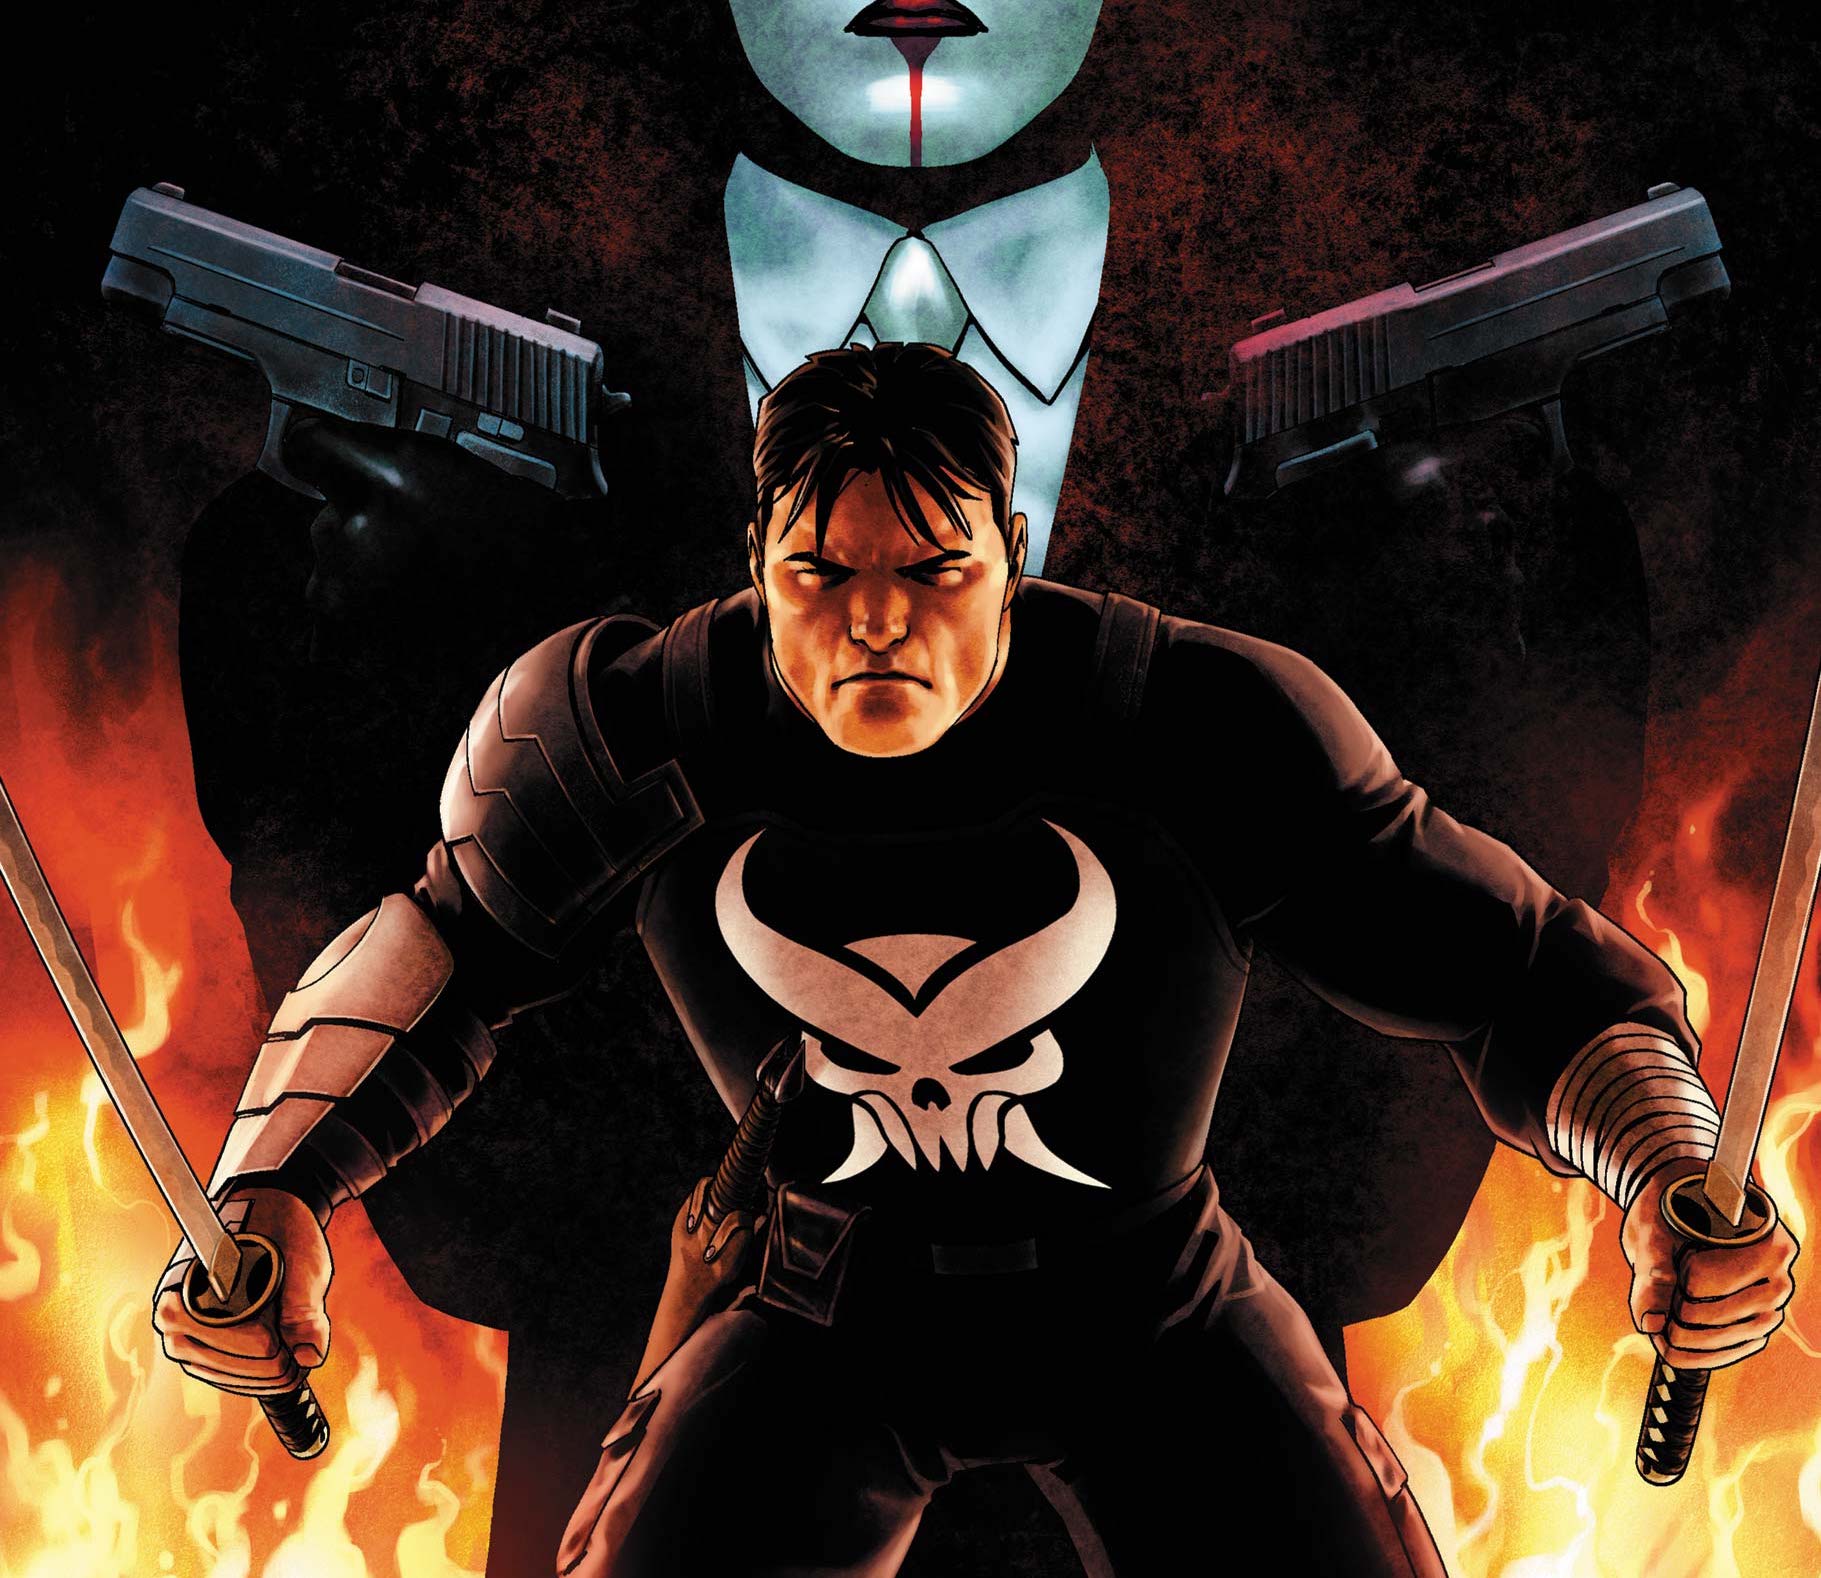 'Punisher' #4 has a mystery that's wearing thin